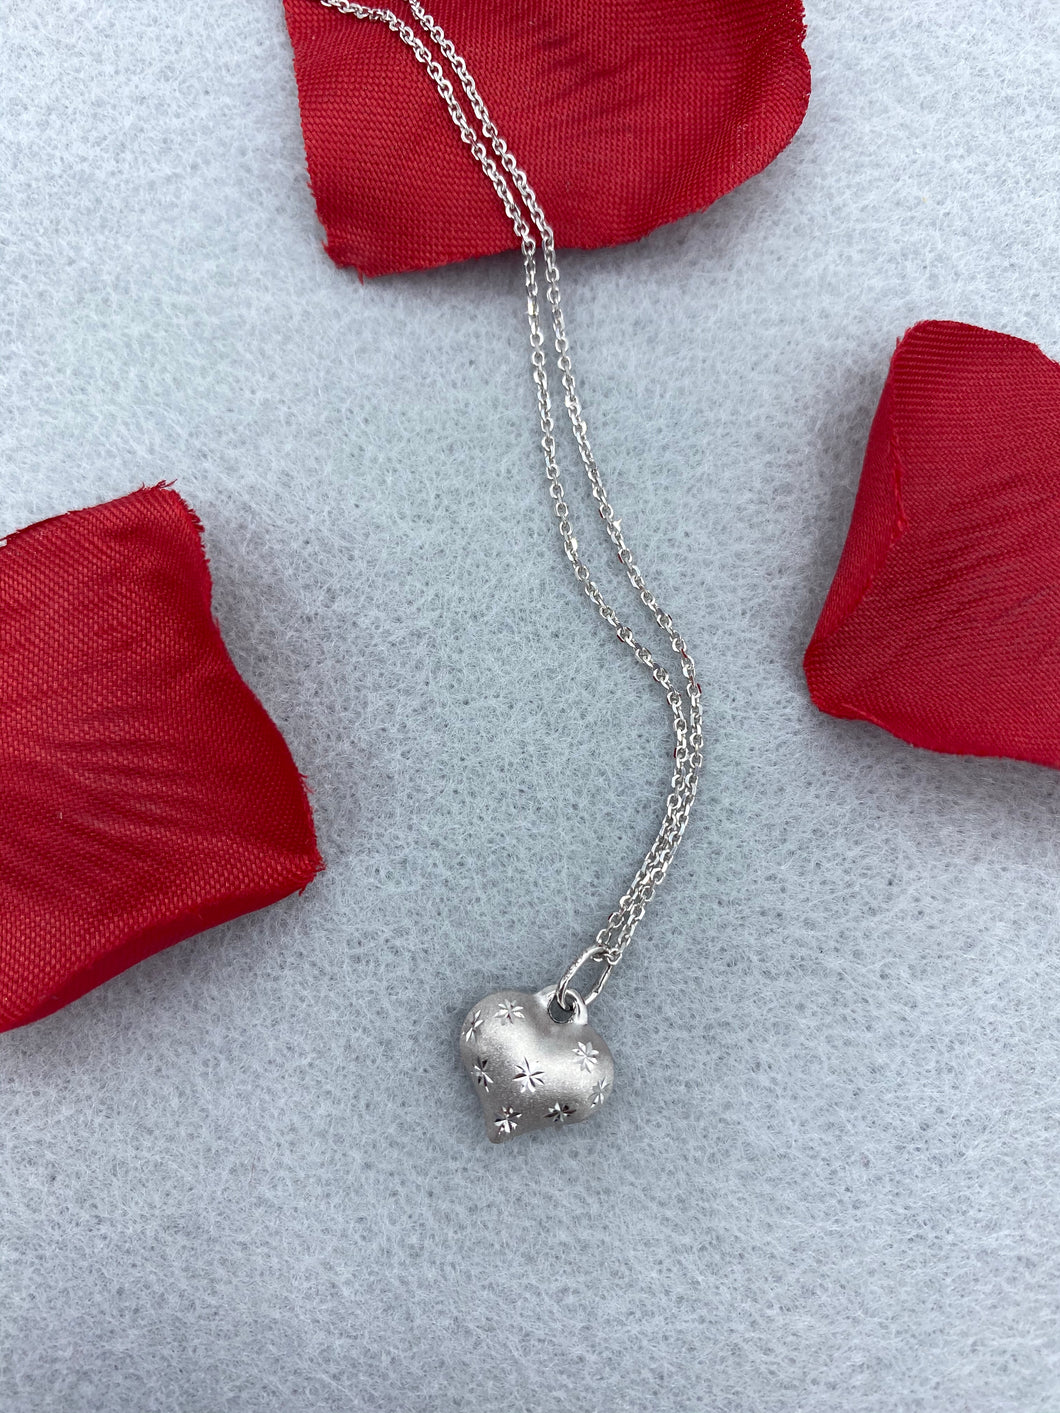 14k white gold puffed heart necklace